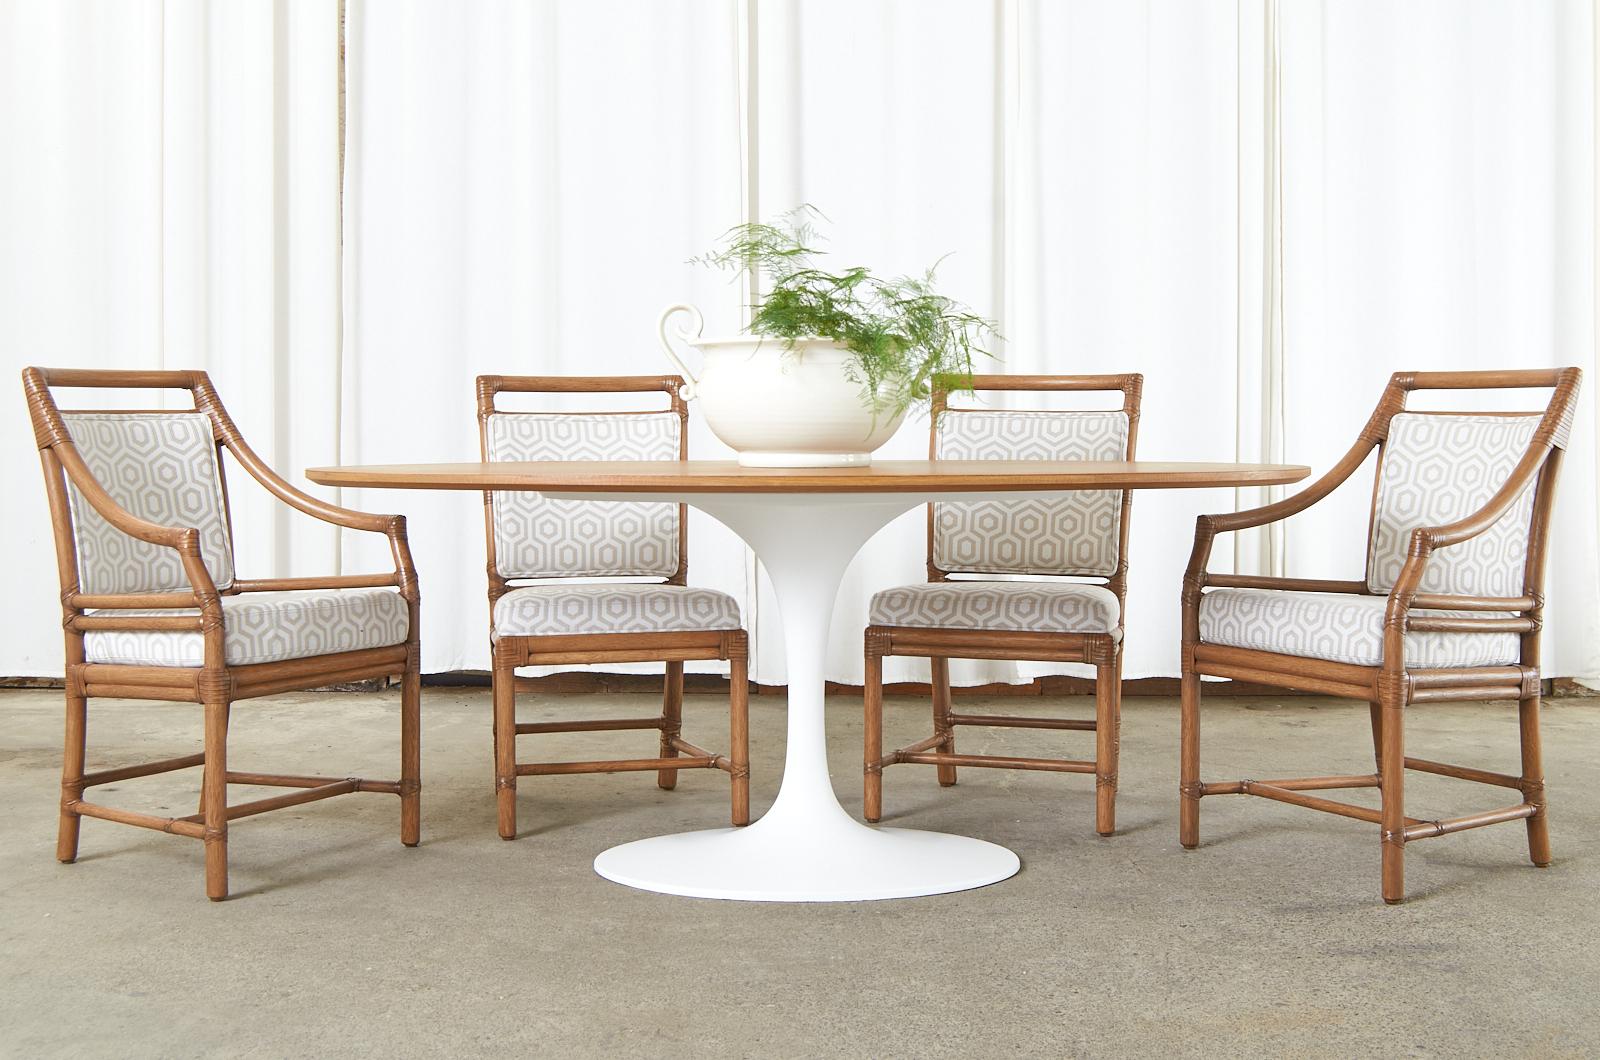 Mid-Century Modern design made in the manner and style of Eero Saarinen for Knoll. The large table features a sleek oval laminate oak top with a thick beveled edge. Supported by an iconic tulip design cast iron base with a white finish. Timeless